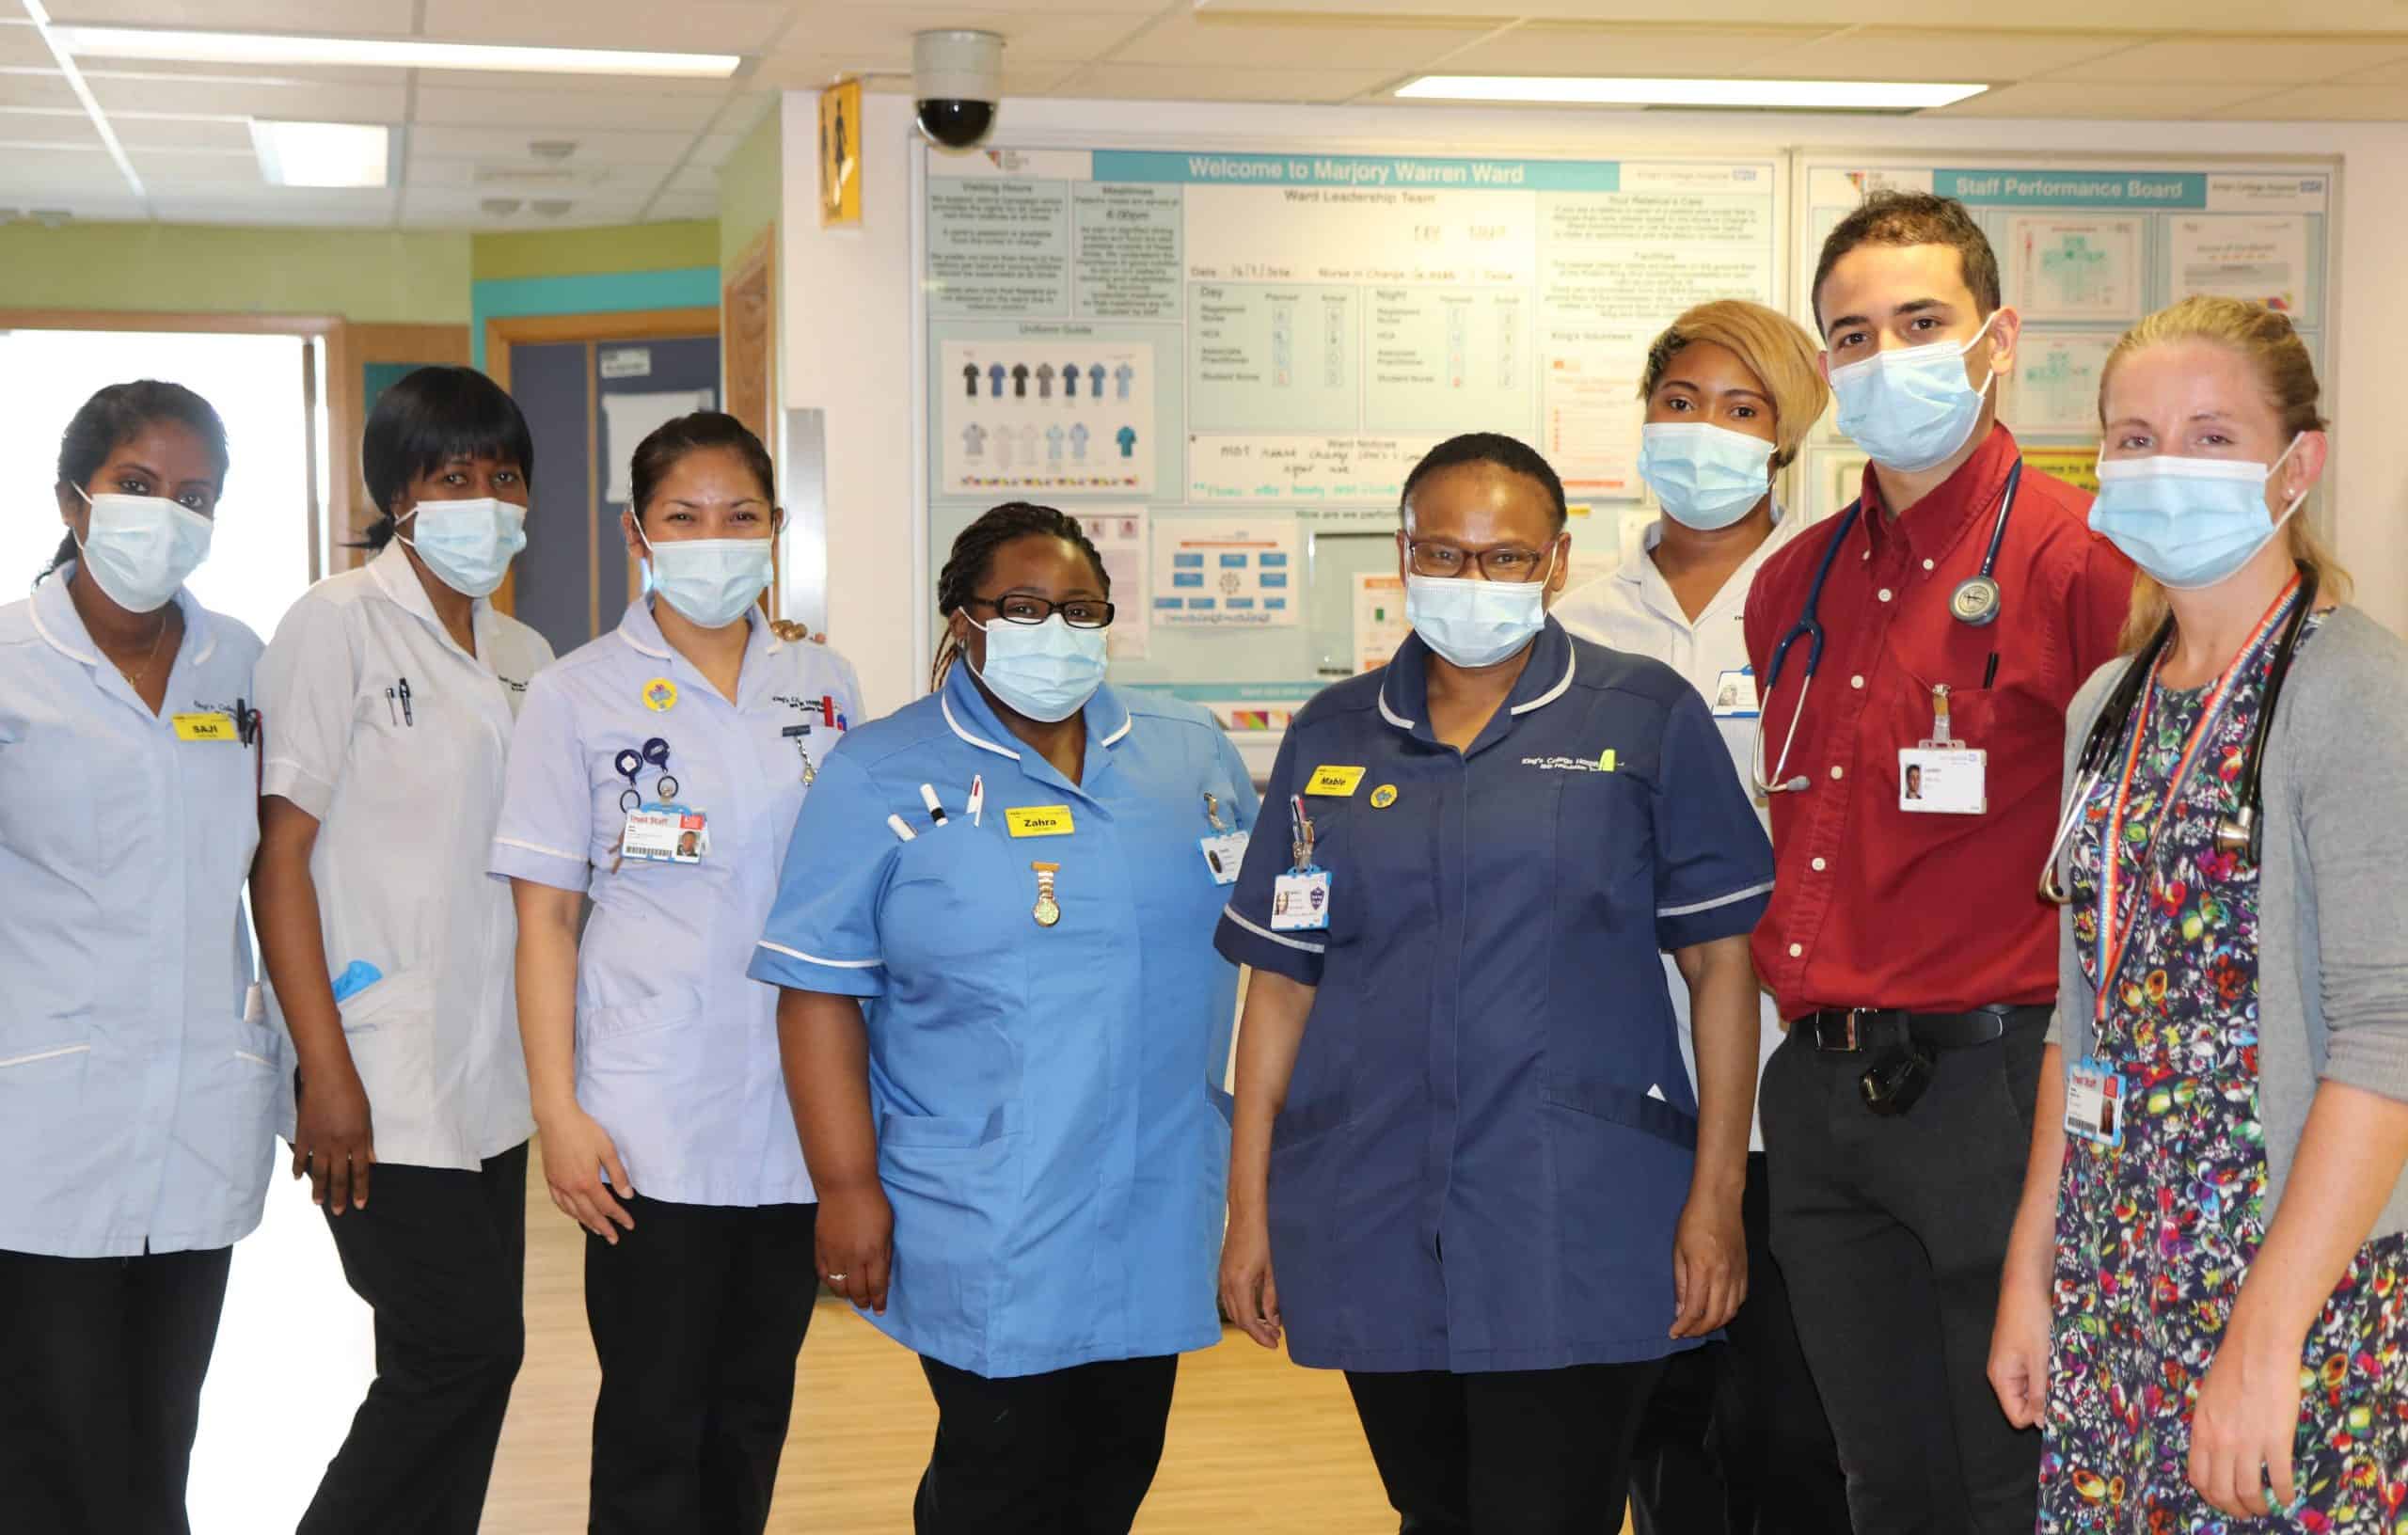 The team on the Marjory Warren ward at King's which treated the patient